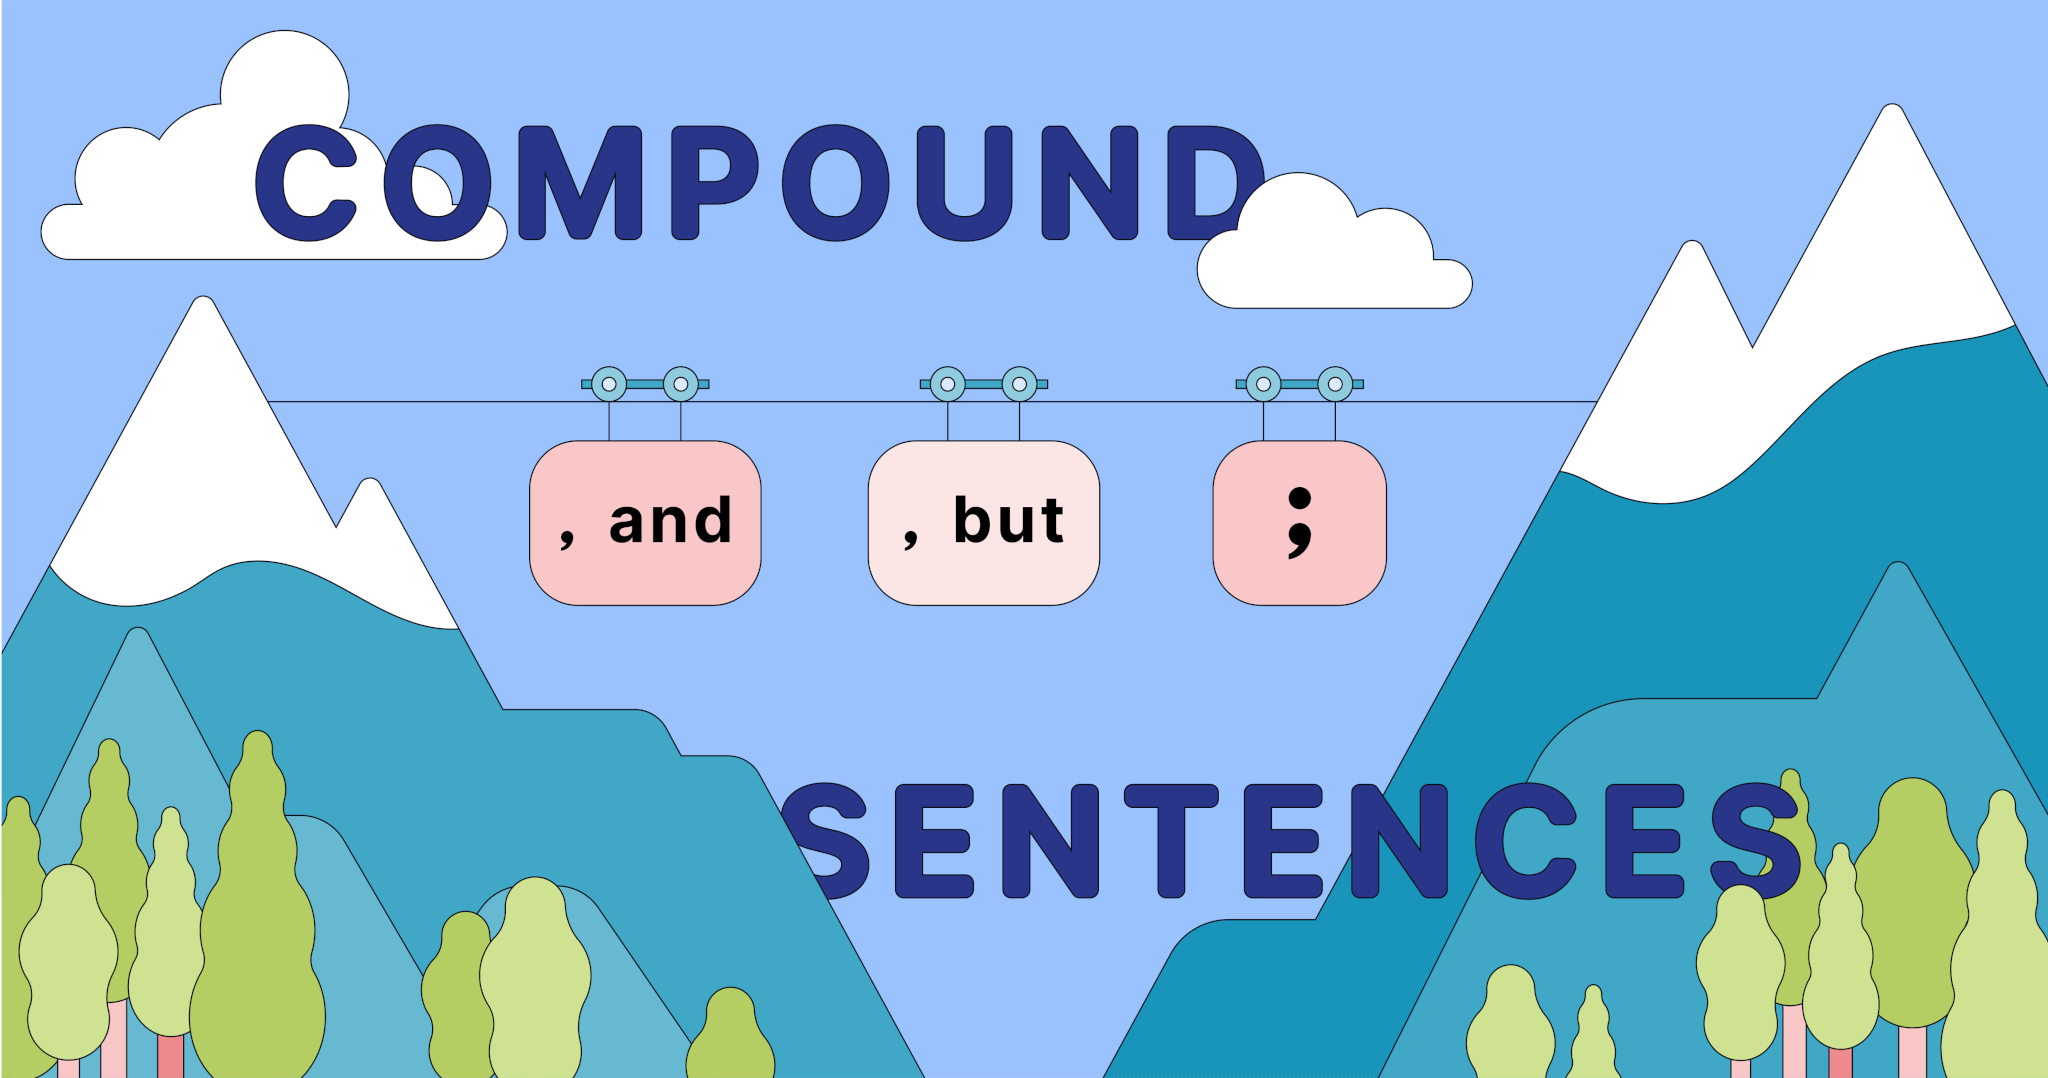 Meaning of Compound Words - Year 11 - Quizizz